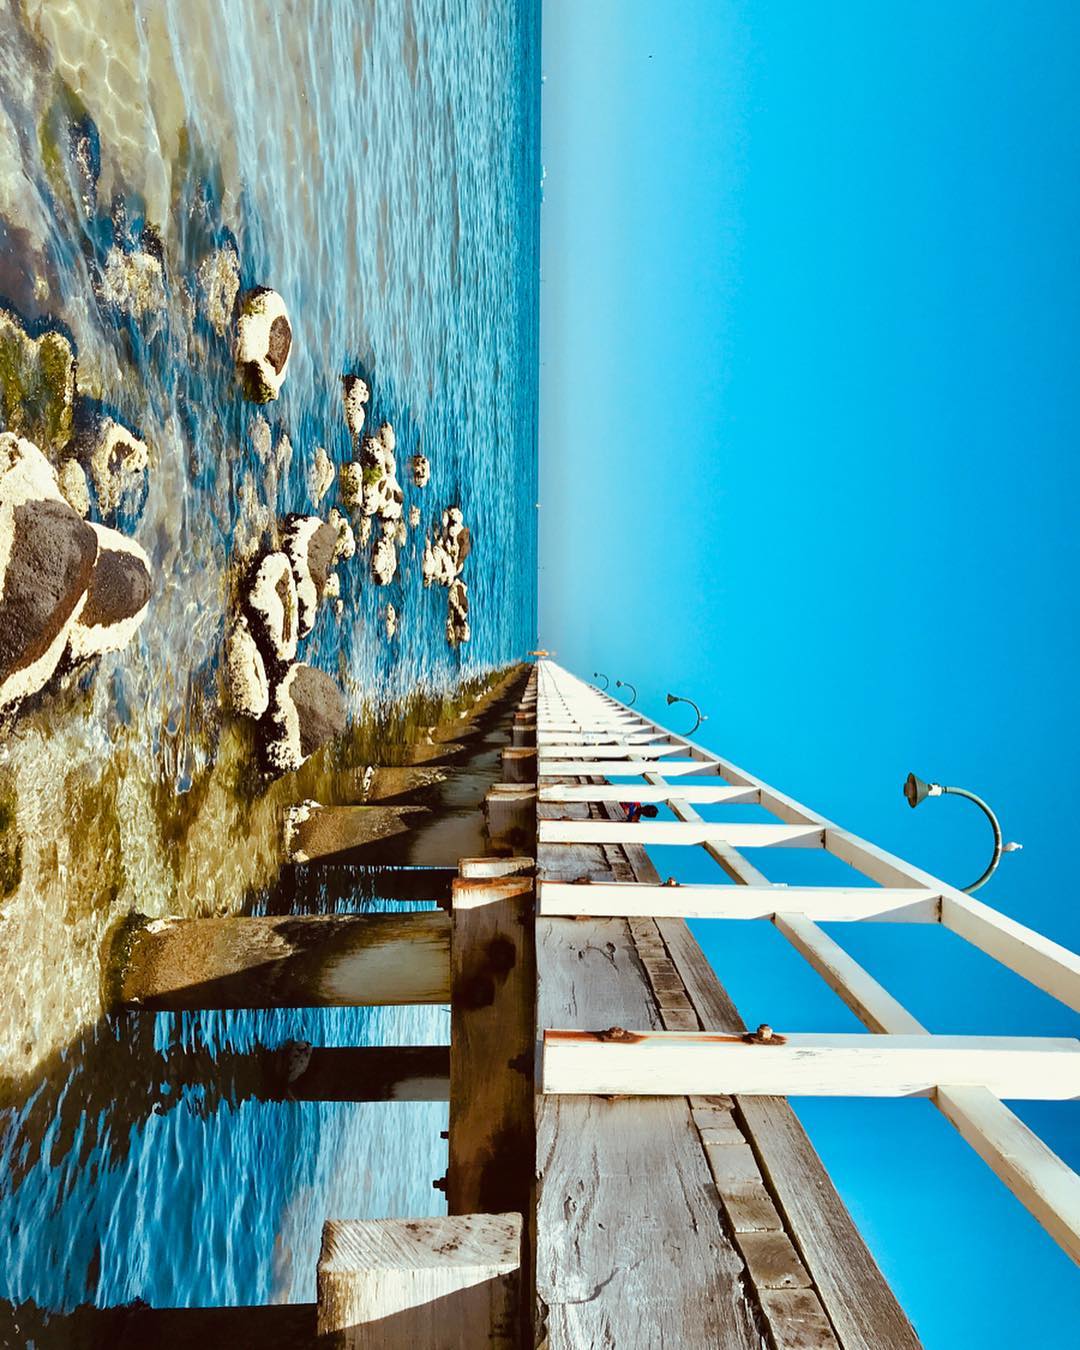 Sideways photo of a pier leading out to water